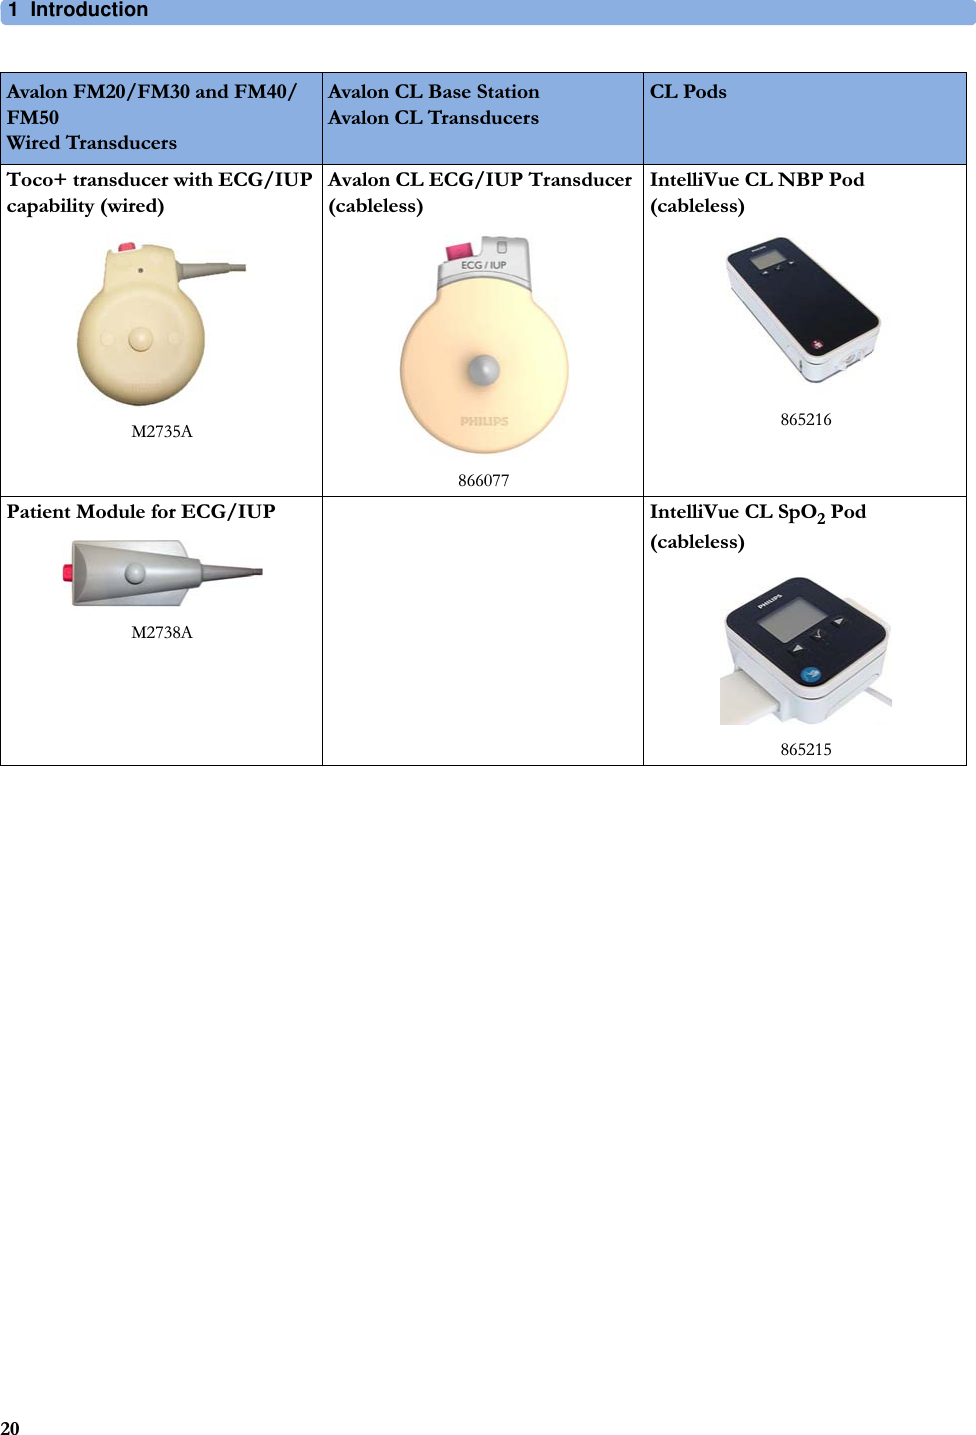 1  Introduction20Toco+ transducer with ECG/IUP capability (wired)M2735AAvalon CL ECG/IUP Transducer (cableless)866077IntelliVue CL NBP Pod (cableless)865216Patient Module for ECG/IUPM2738AIntelliVue CL SpO2 Pod (cableless)865215Avalon FM20/FM30 and FM40/FM50 Wired TransducersAvalon CL Base Station Avalon CL TransducersCL Pods